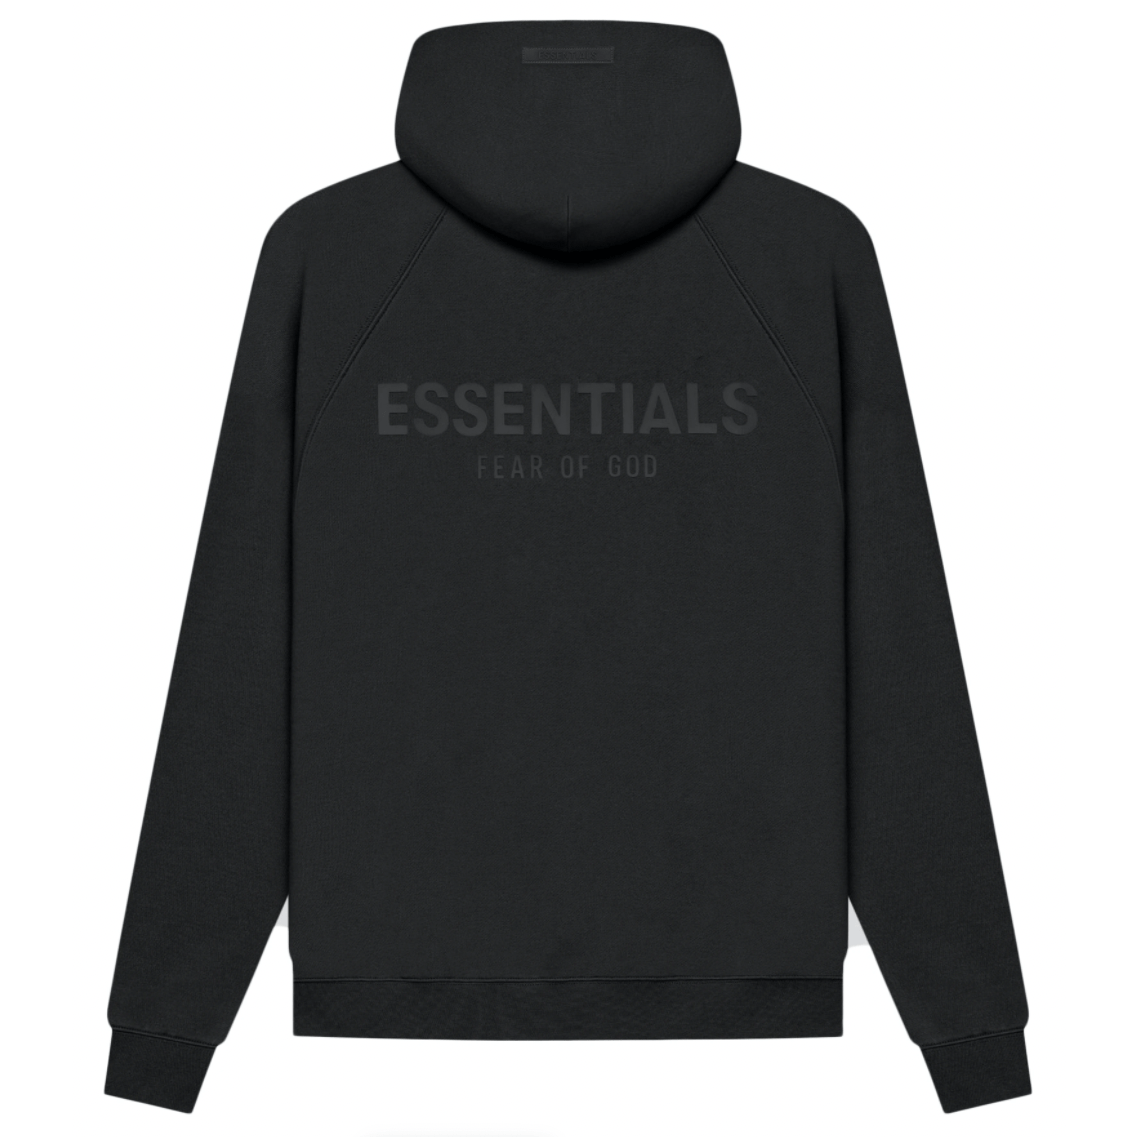 FEAR OF GOD ESSENTIALS Pull-Over Hoodie (SS21) Black/Stretch Limo